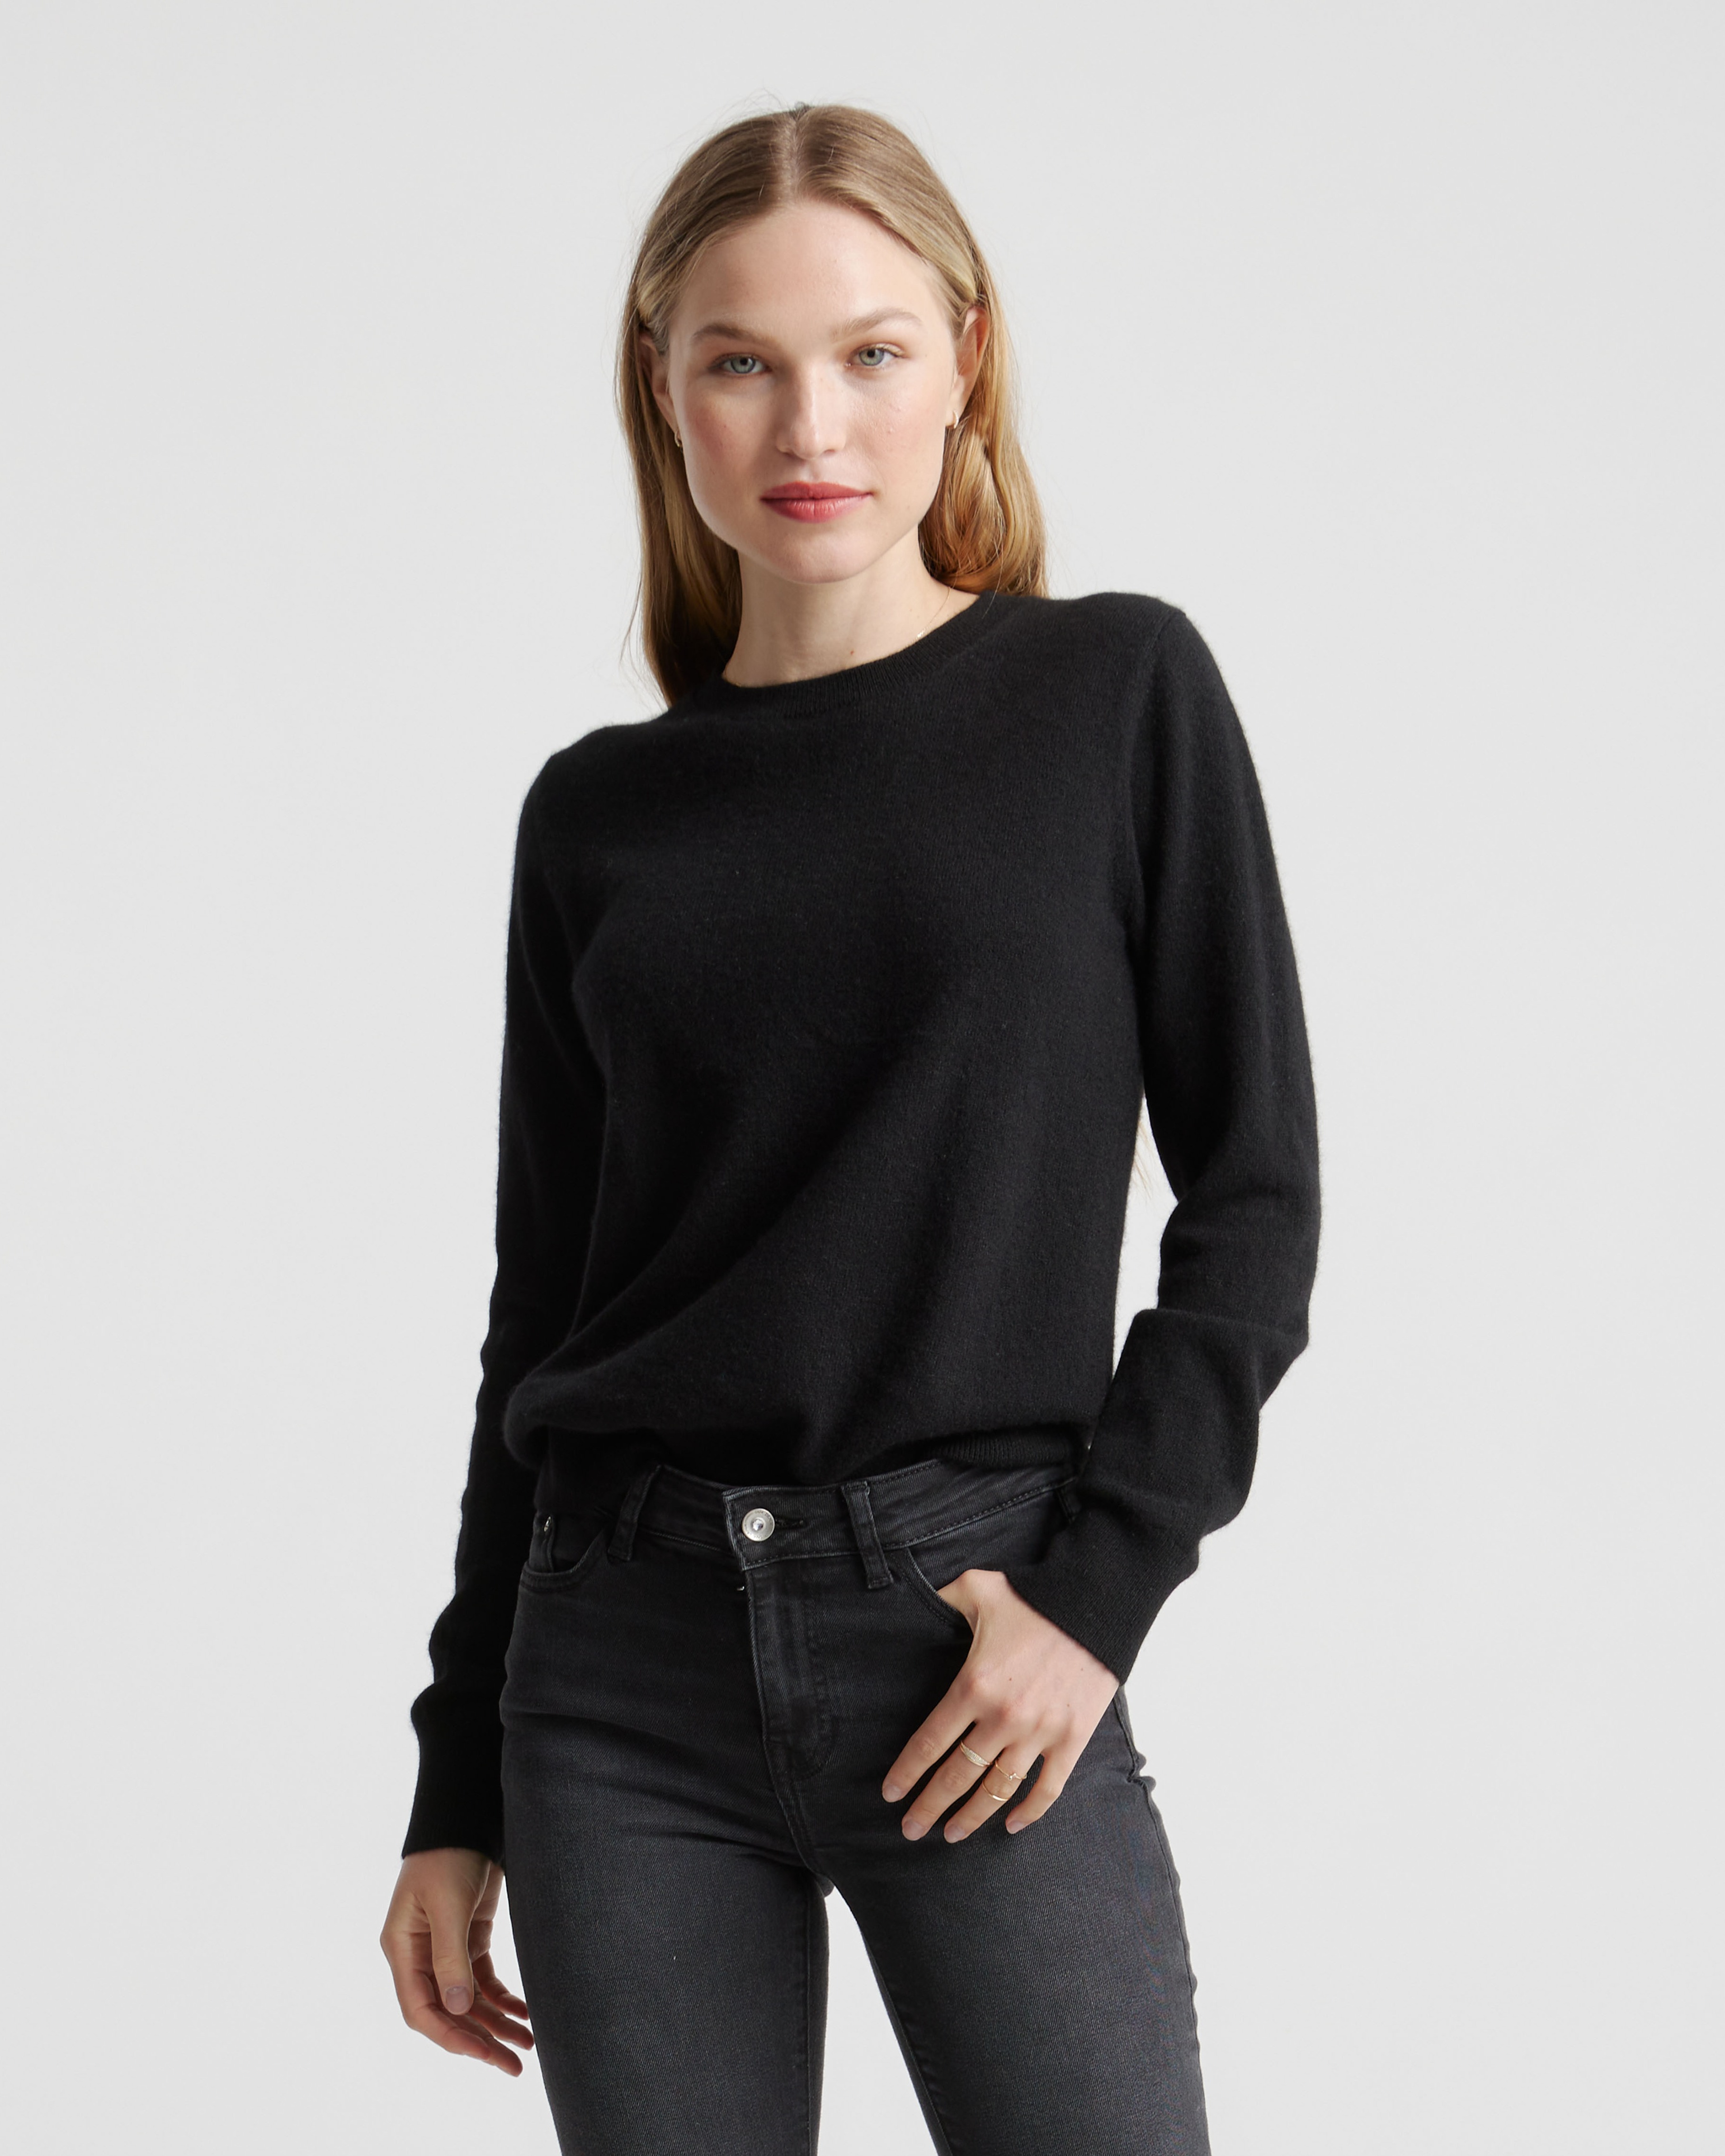 Quince Cashmere On 3 Body Types: How Thse Affordable Cashmere